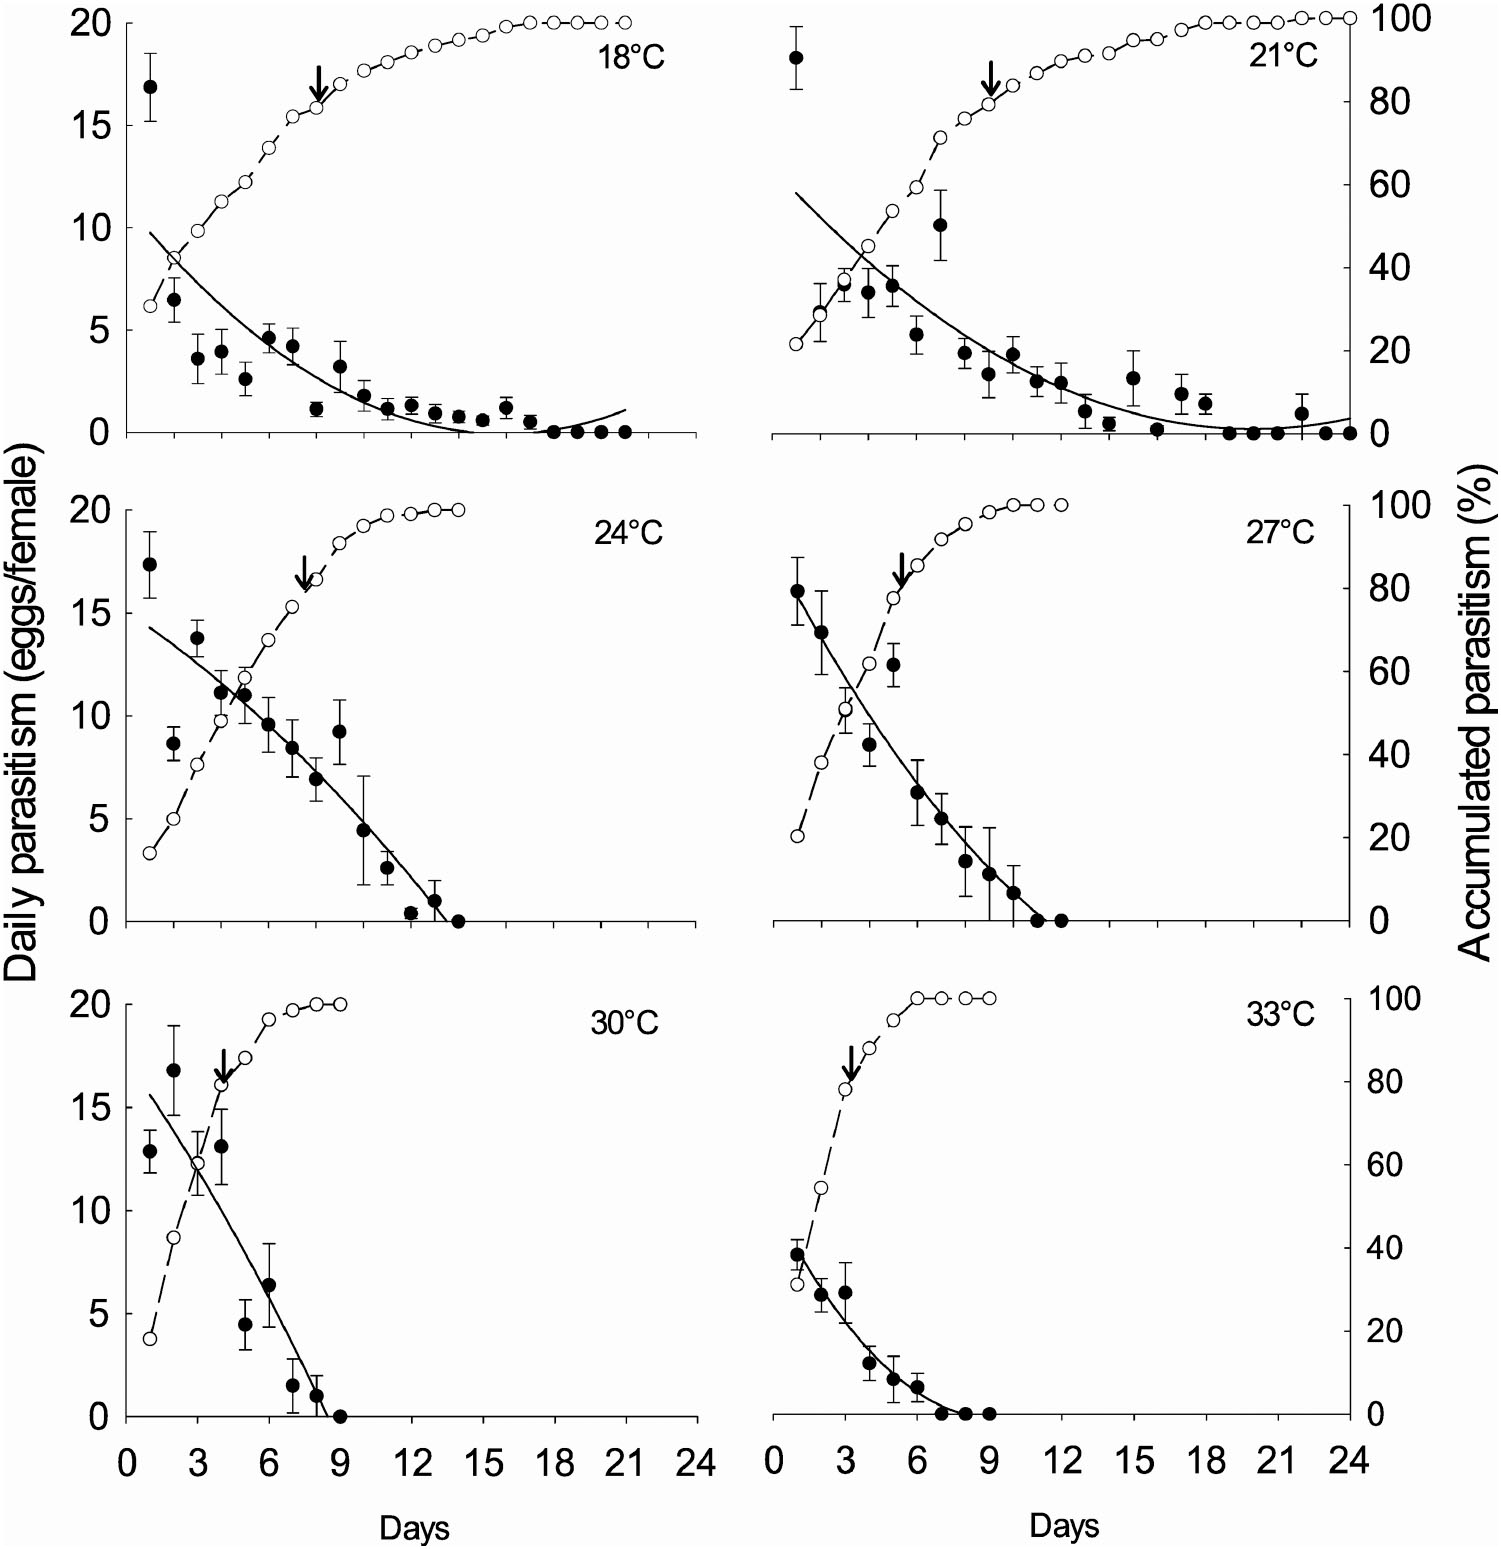 Thermal Requirements And Performance Of The Parasitoid Trichogramma Pretiosum Hymenoptera Trichogrammatidae On Helicoverpa Armigera Lepidoptera Noctuidae Eggs Under Variable Temperatures